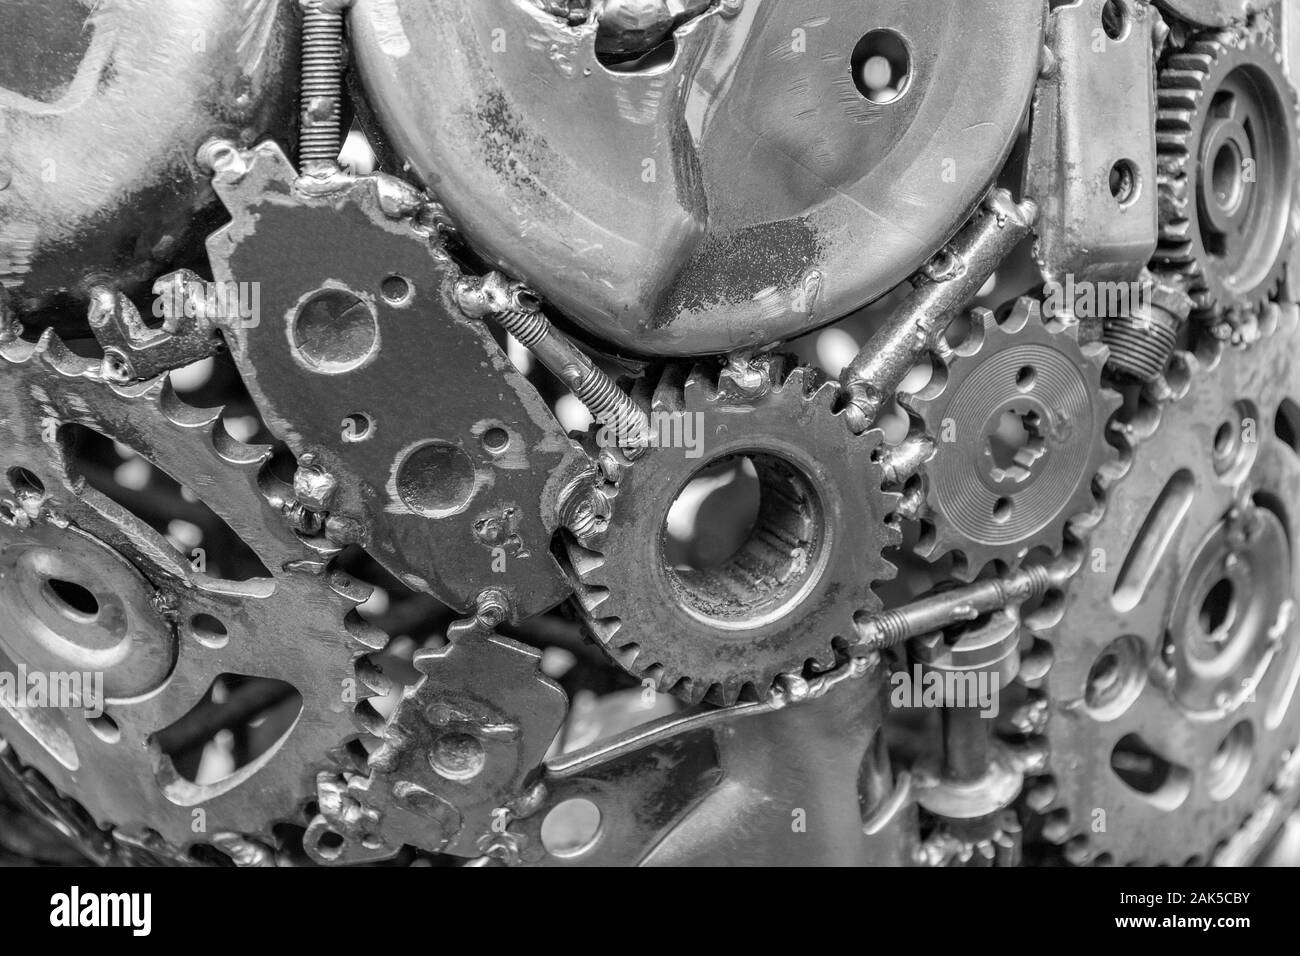 full frame metallic mechanical background with gear wheels and other material Stock Photo